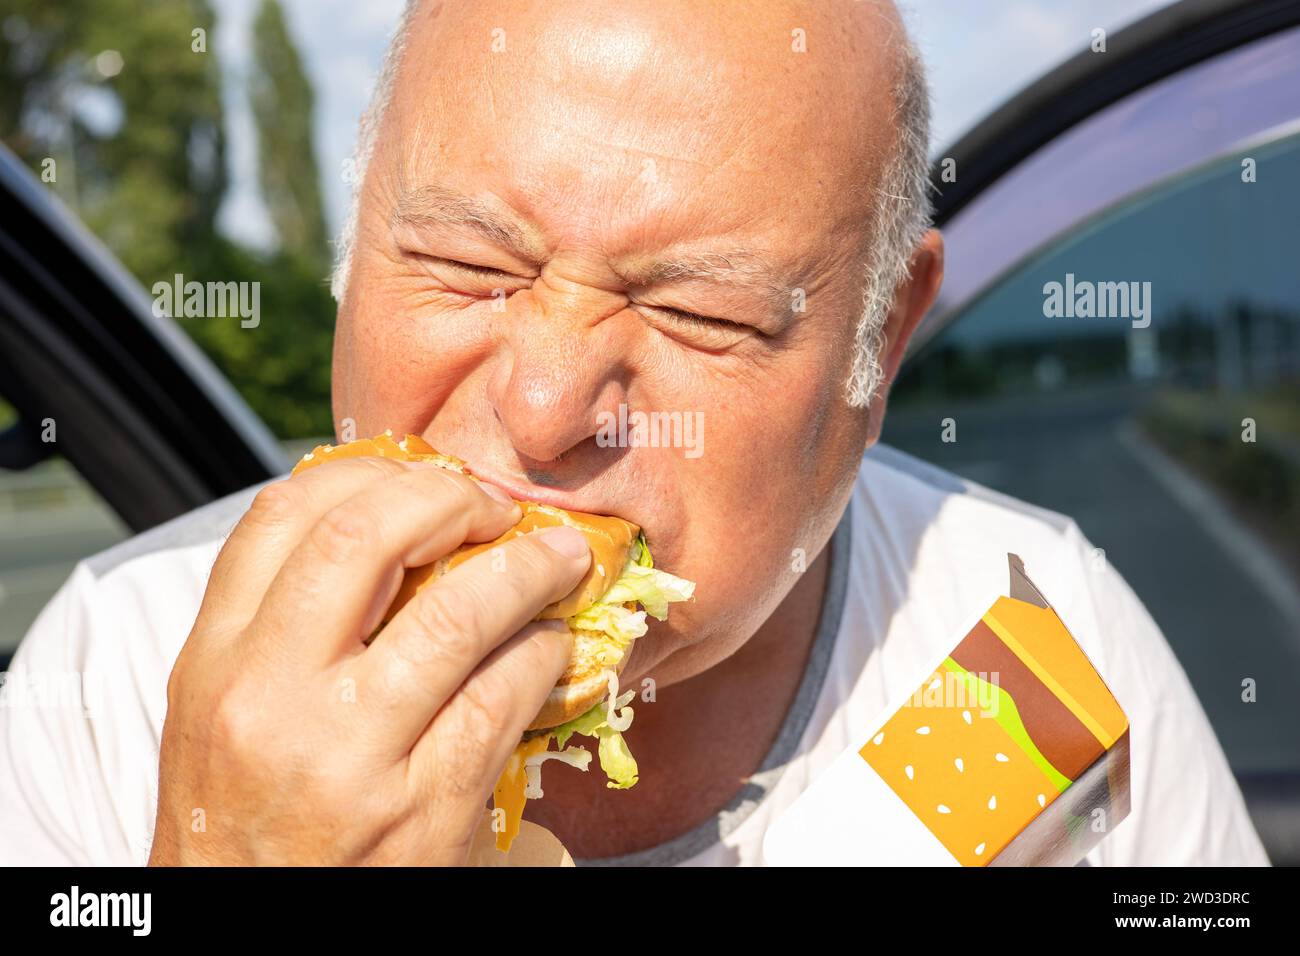 Grown man enjoying burger by the side of a car. The concept of fast food and takeaway food. Big juicy burger with cheese from McDonalds in the hand. Kiev, Ukraine, July 08 2023 Copyright: xDmytroxNikolaienkox Stock Photo